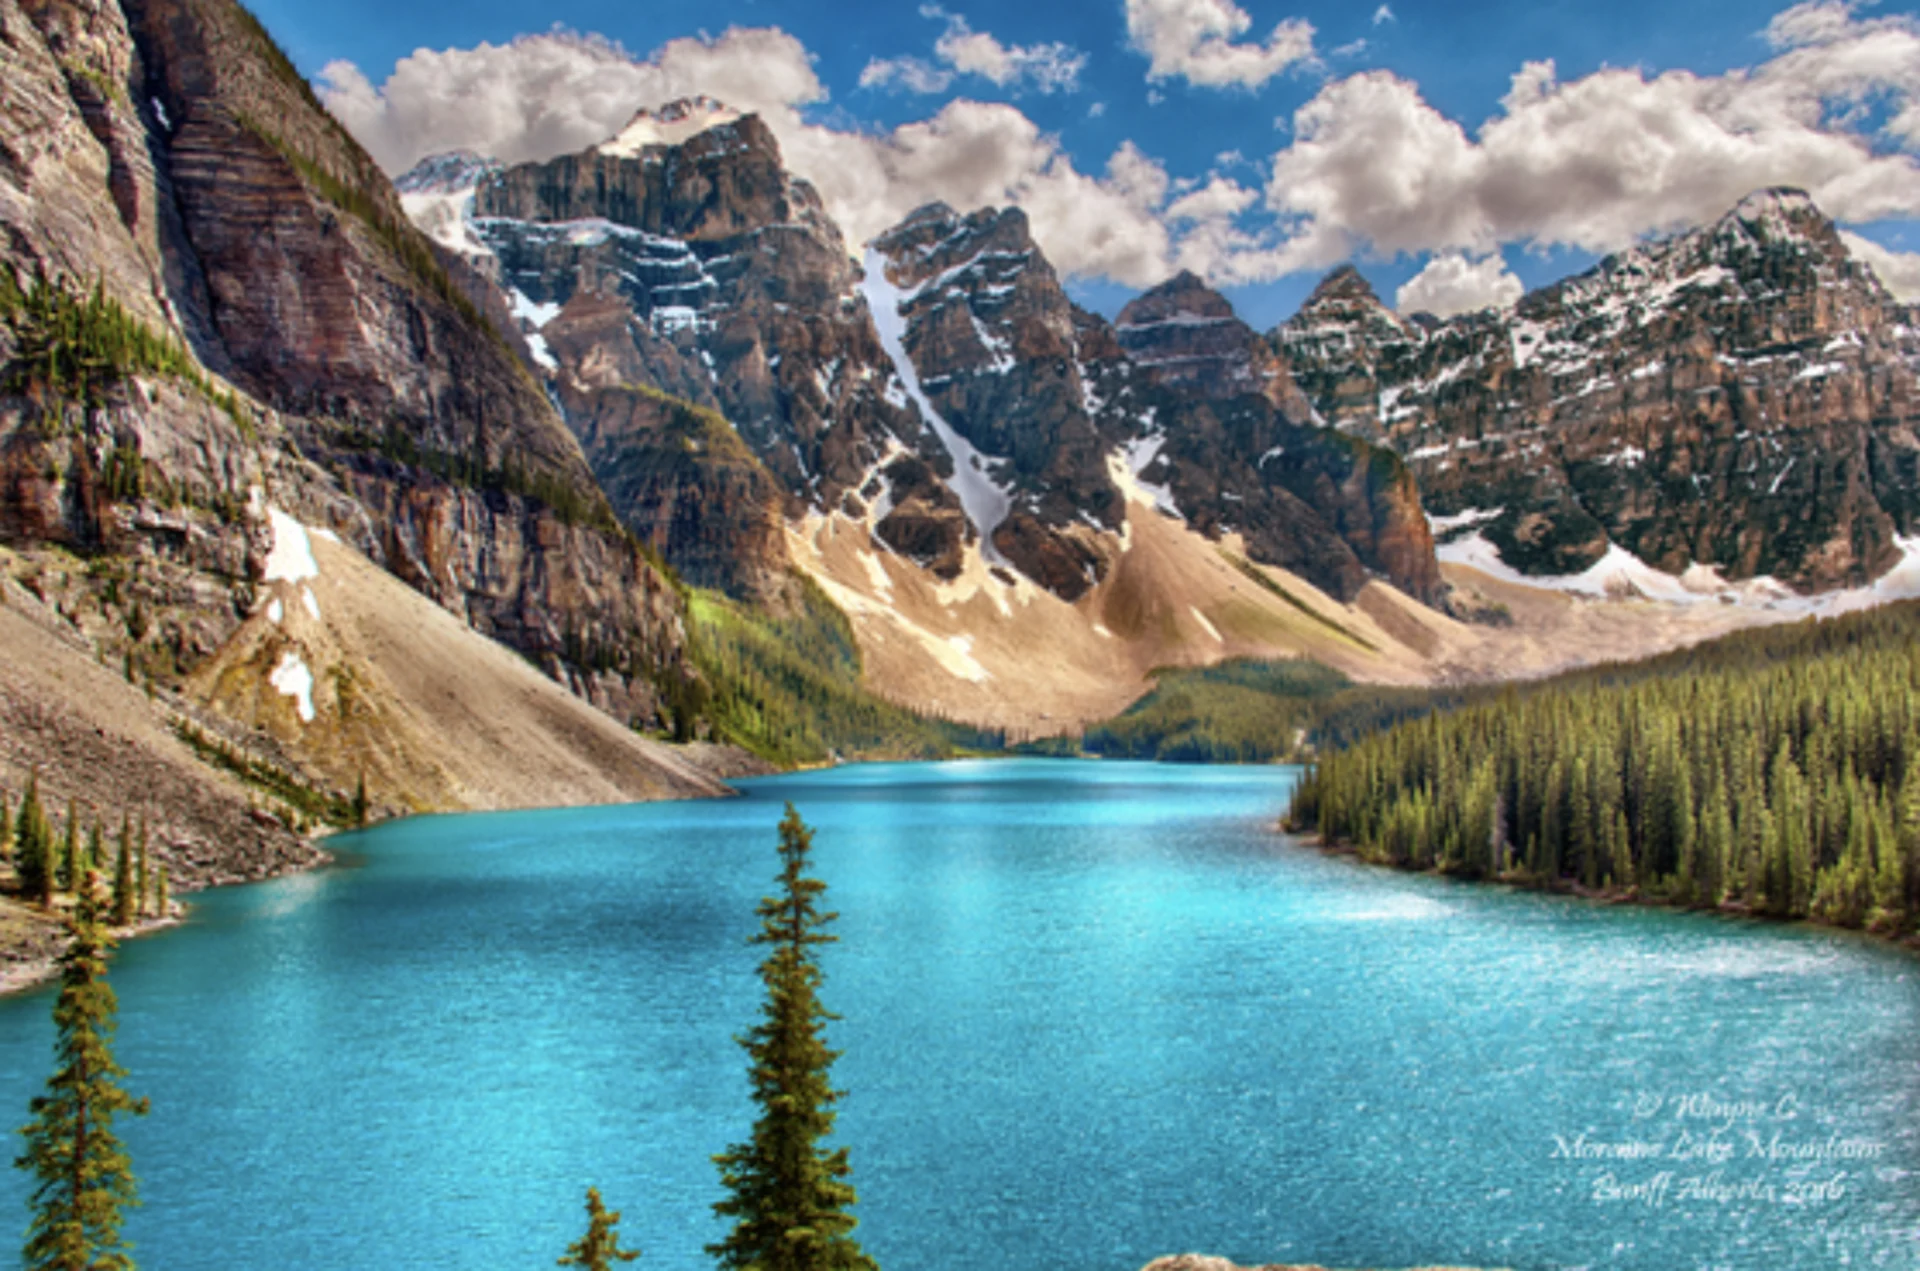 Canada's alpine lakes are changing colour, losing their distinctive blue trait